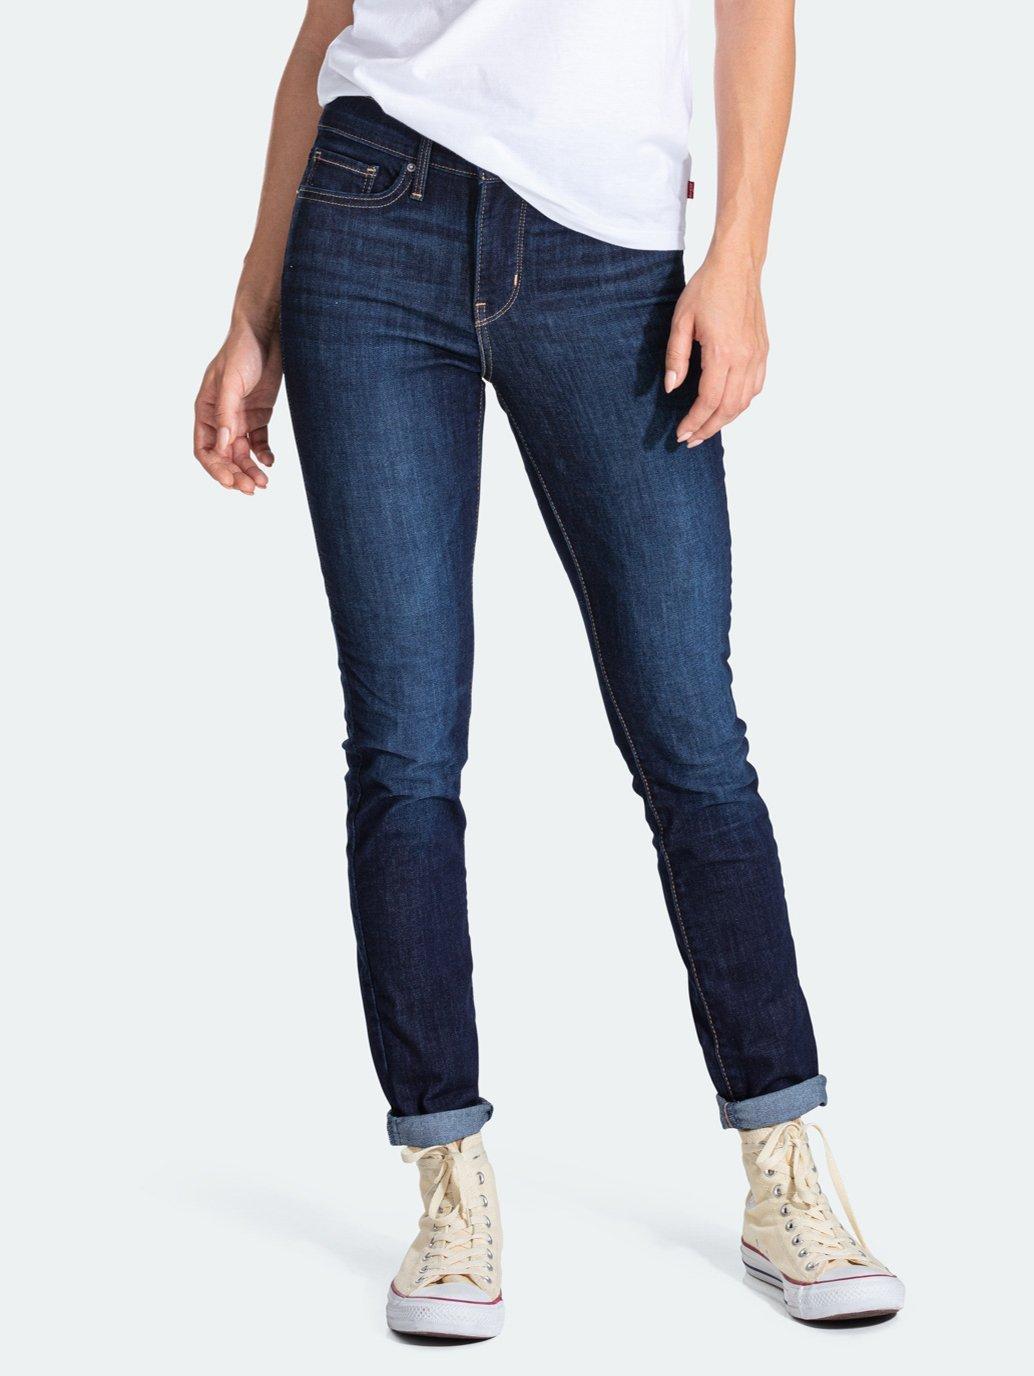 Buy 311 Shaping Skinny Jeans | Levi's® Official Online ...